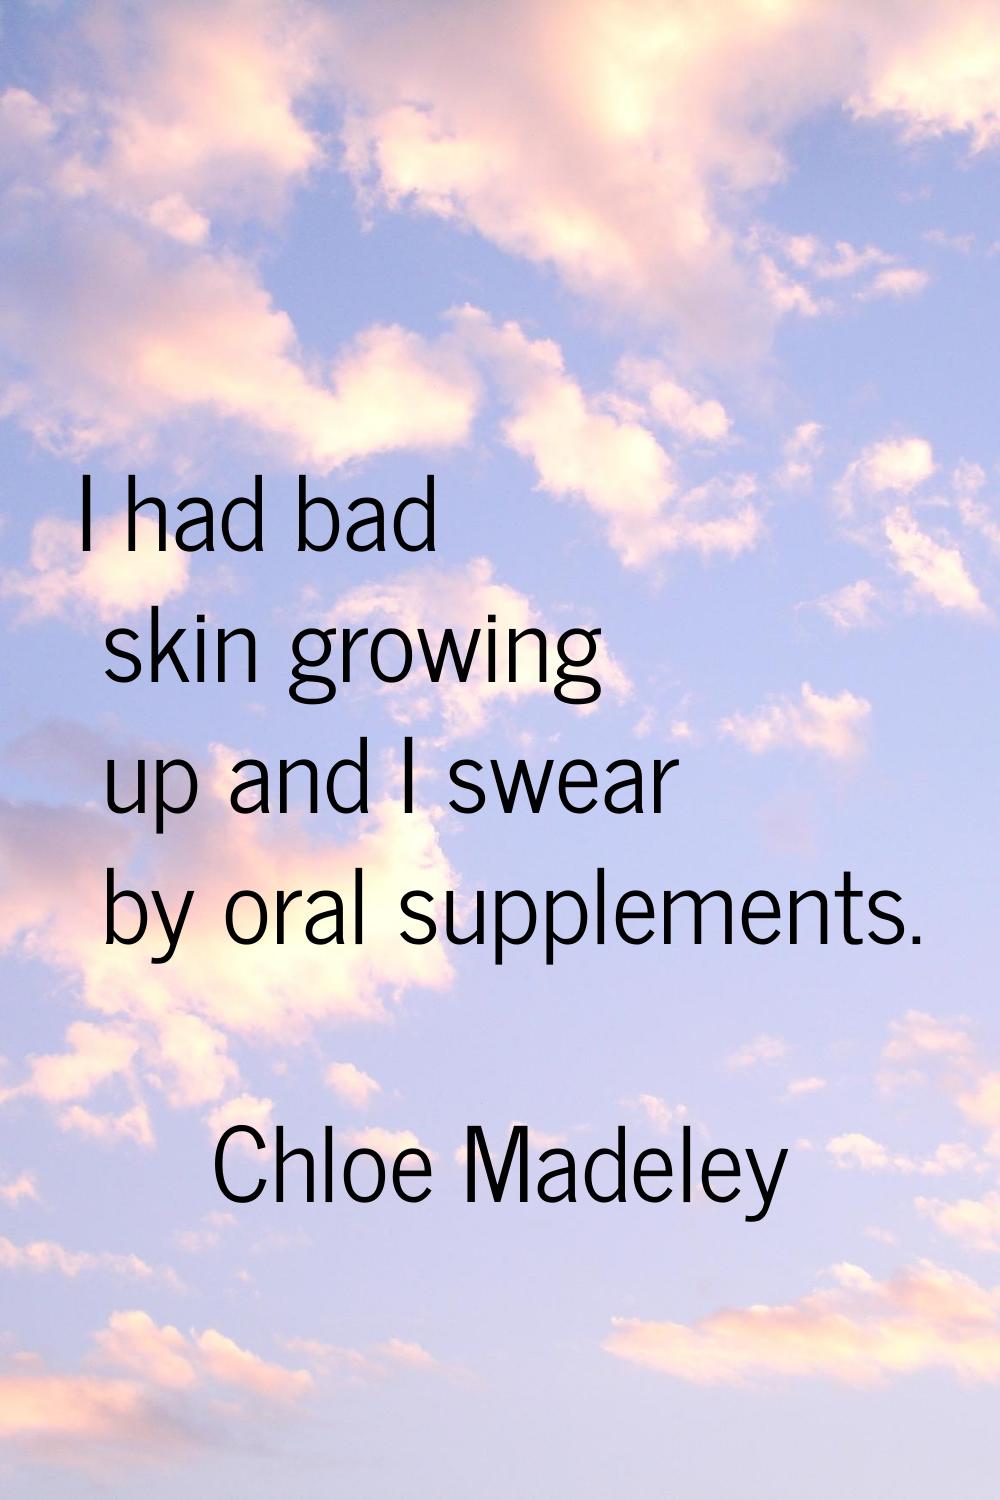 I had bad skin growing up and I swear by oral supplements.